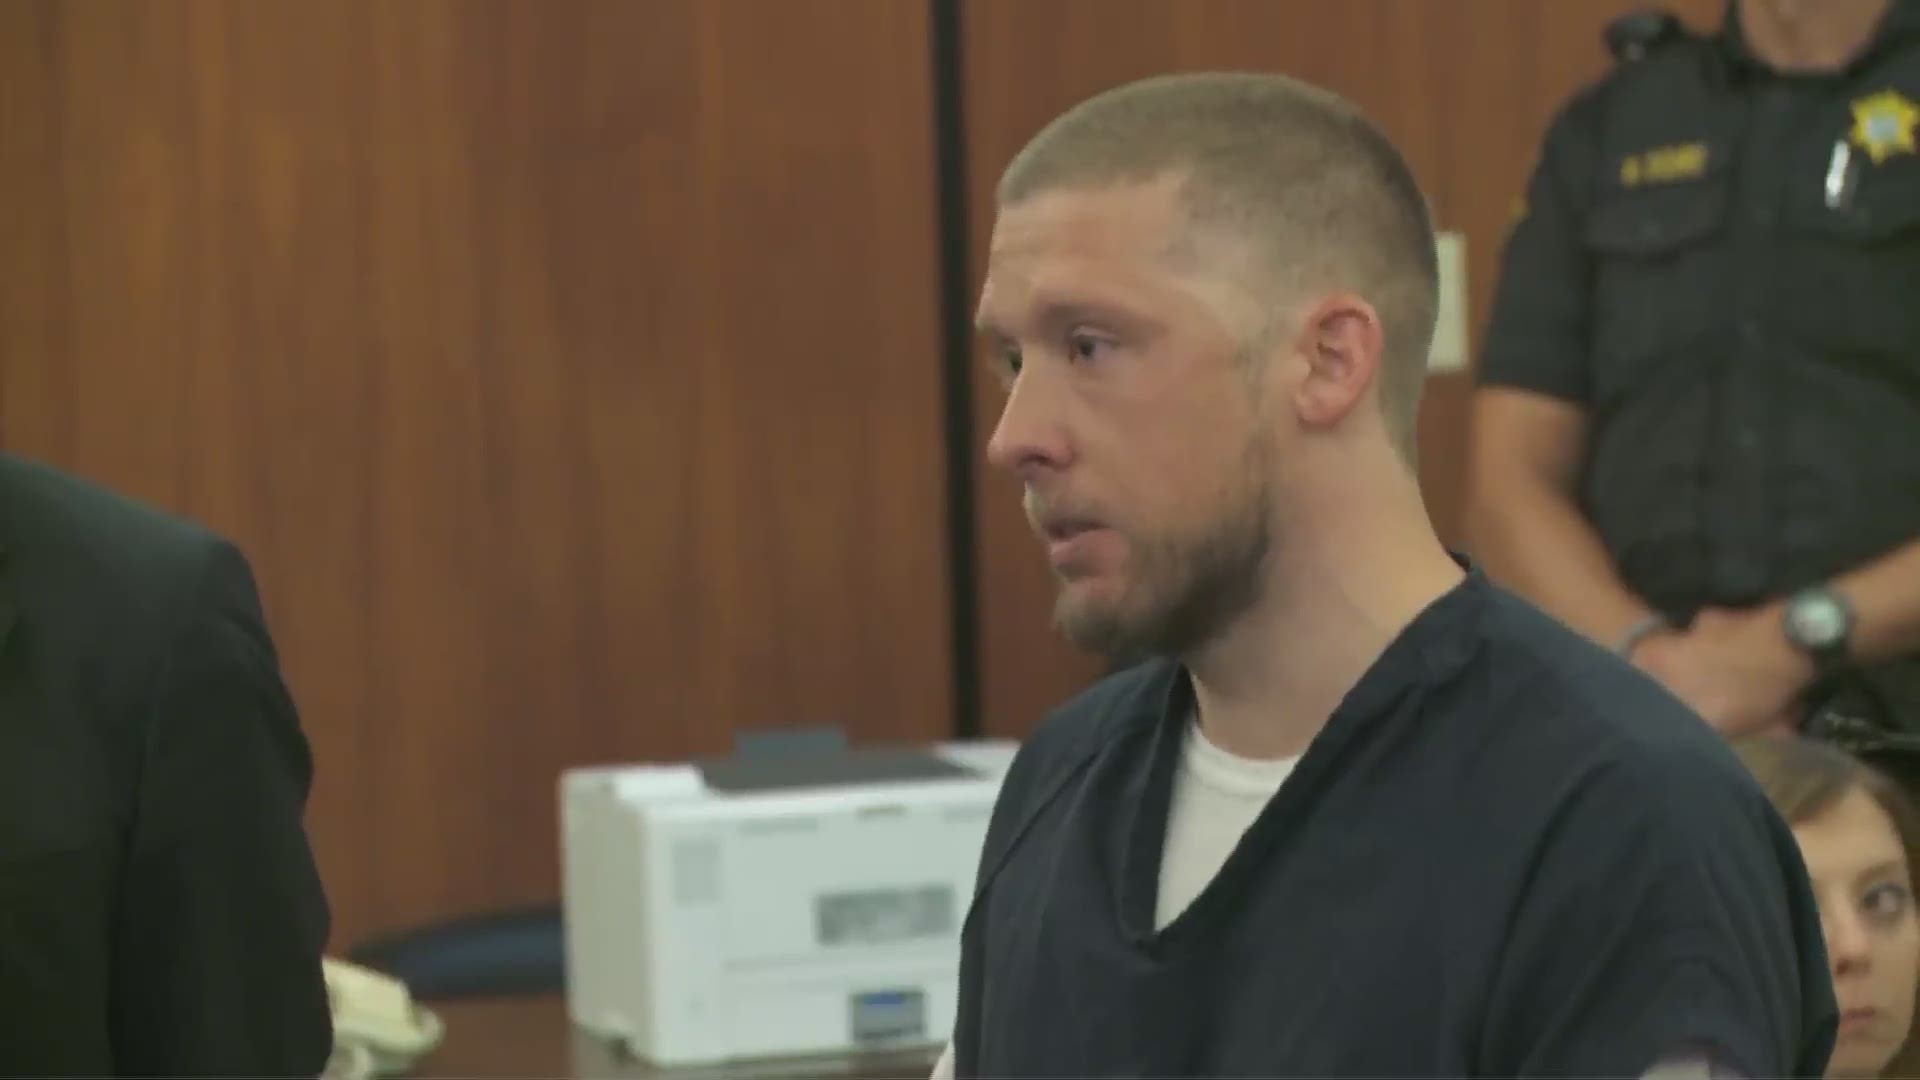 The ex-trooper who shot an unarmed man apologizes to the victim before he was sentenced.